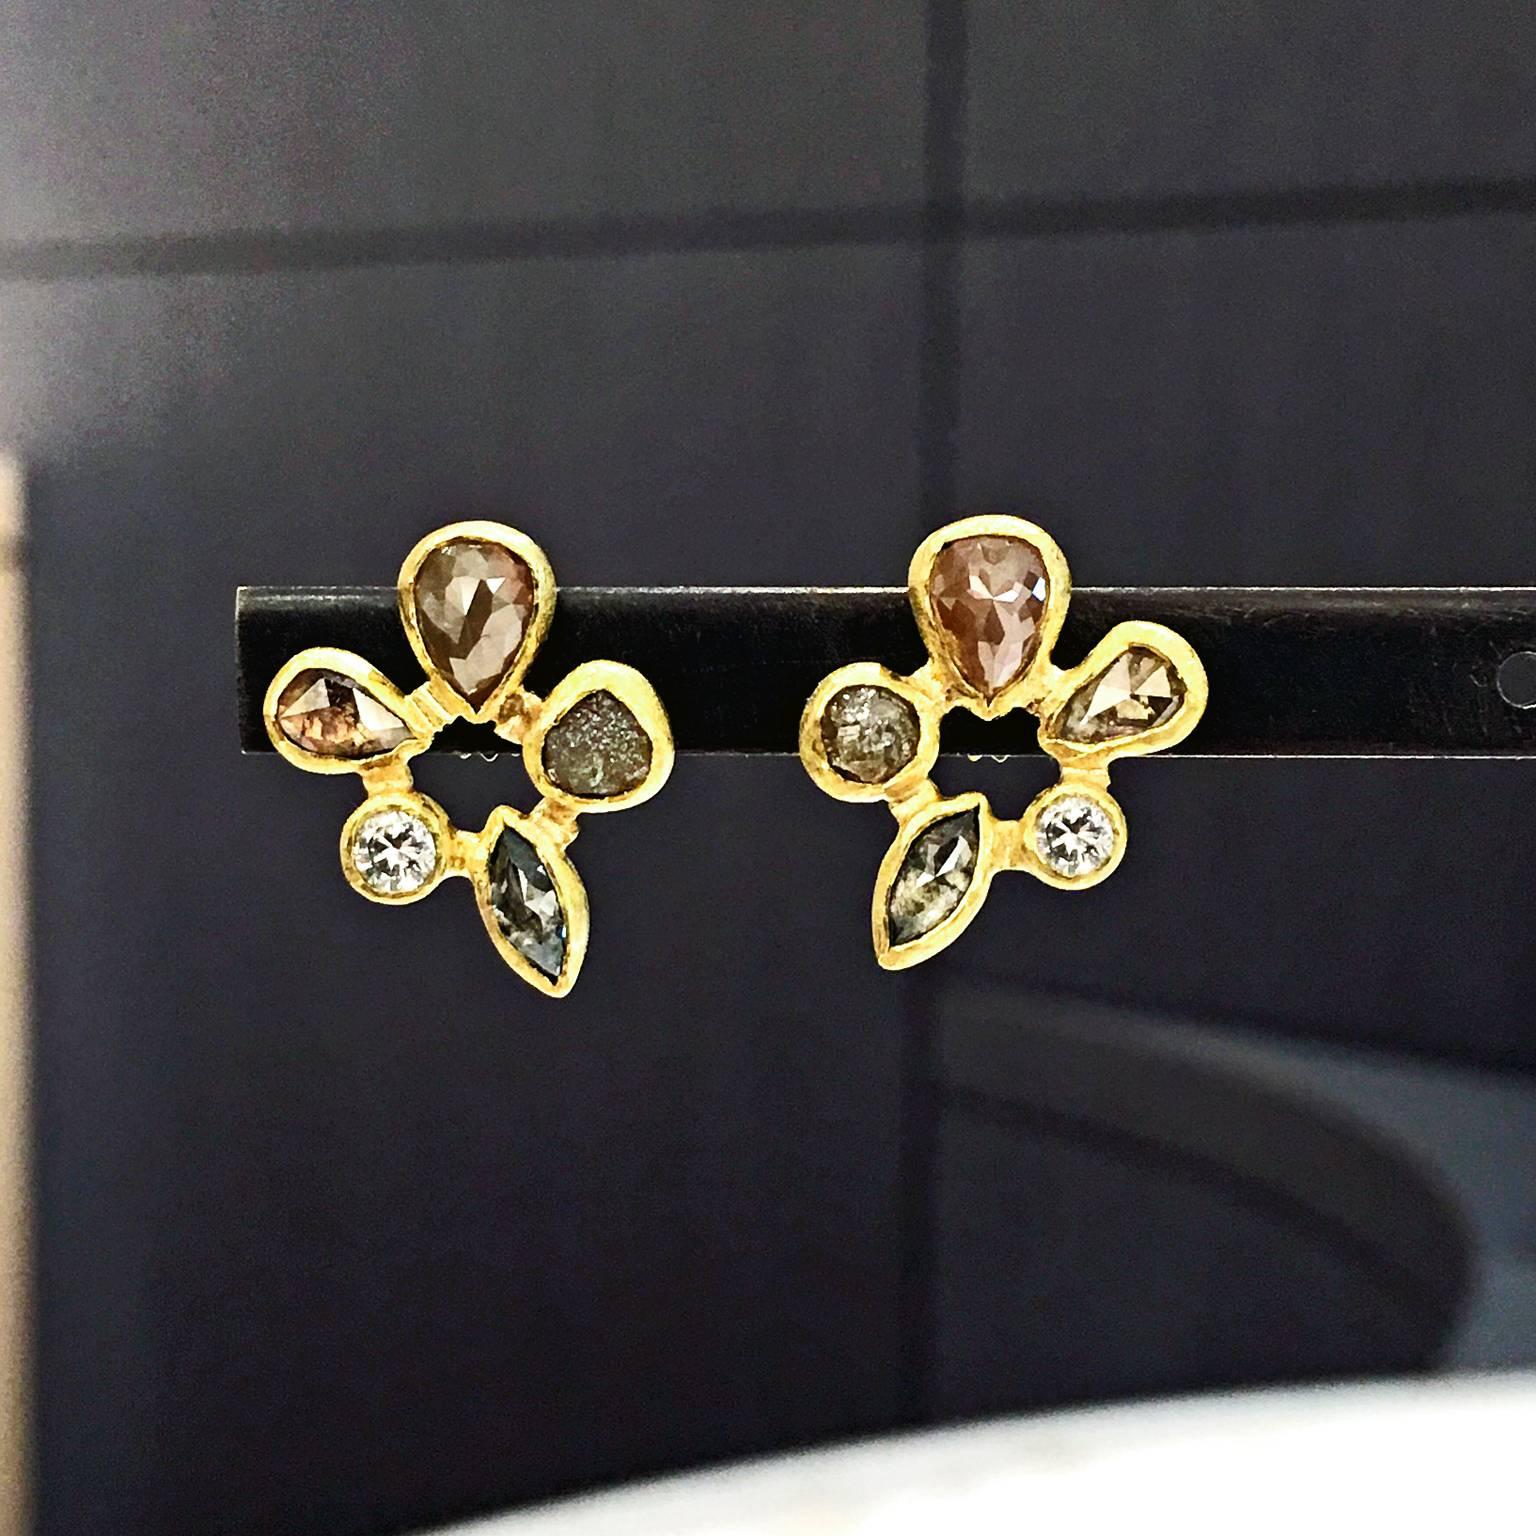 One-of-a-Kind Five Point Stud Earrings handmade by jewellery artist Petra Class in matte and satin-finished 22k yellow gold with ten shimmering assorted faceted and rough bezel-set diamonds totaling 1.80 carats on 18k yellow gold posts.

Stamped